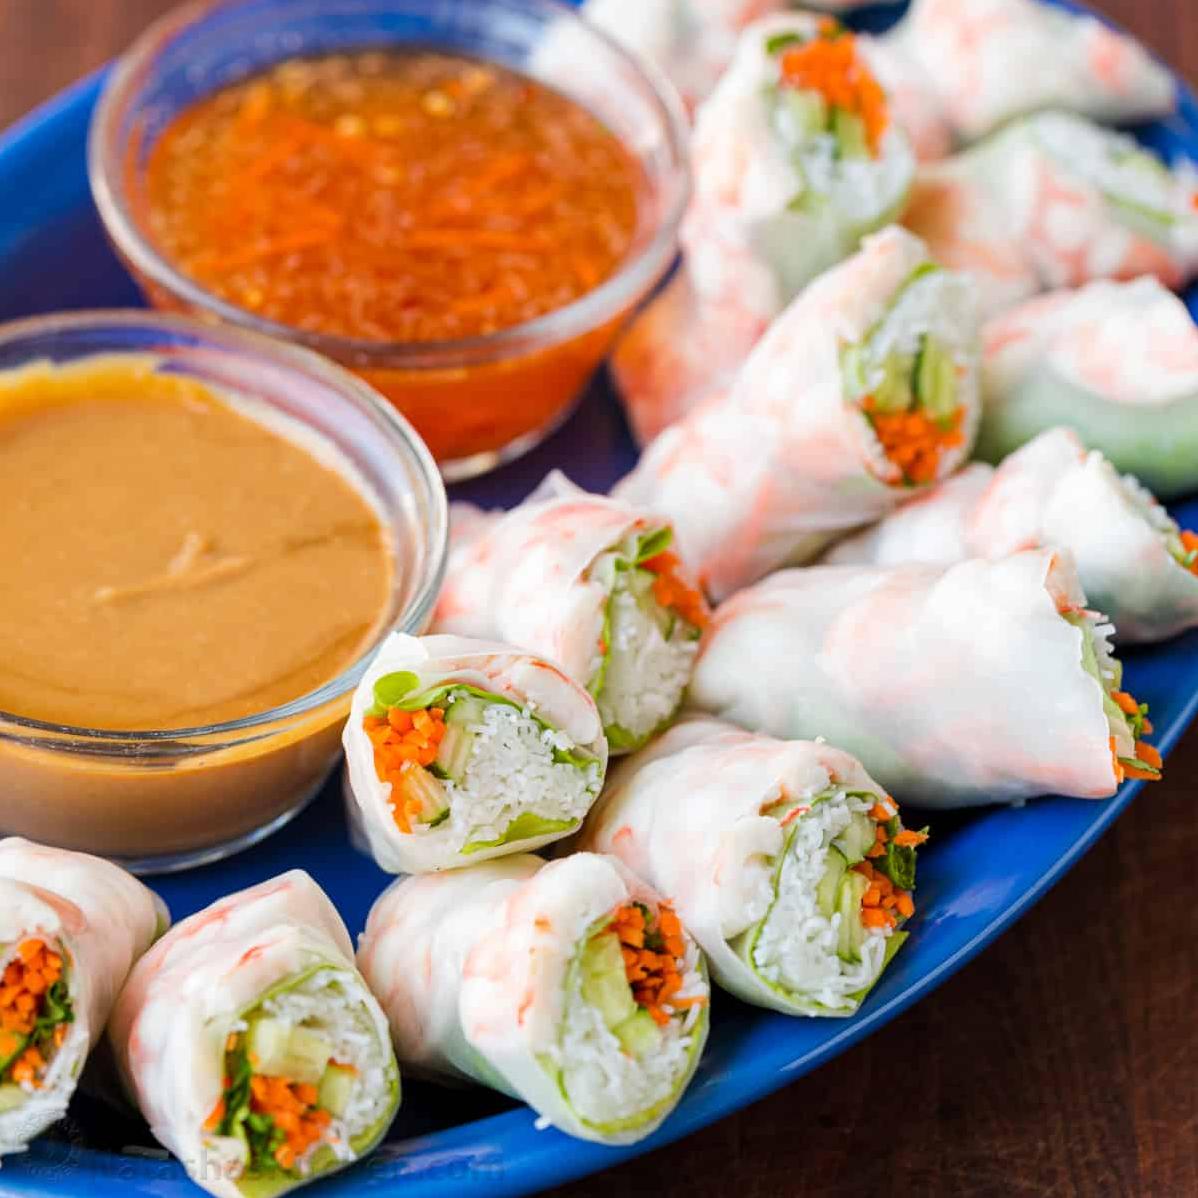  These spring rolls are the epitome of health and flavor, perfect for those who wish to indulge without feeling guilty.